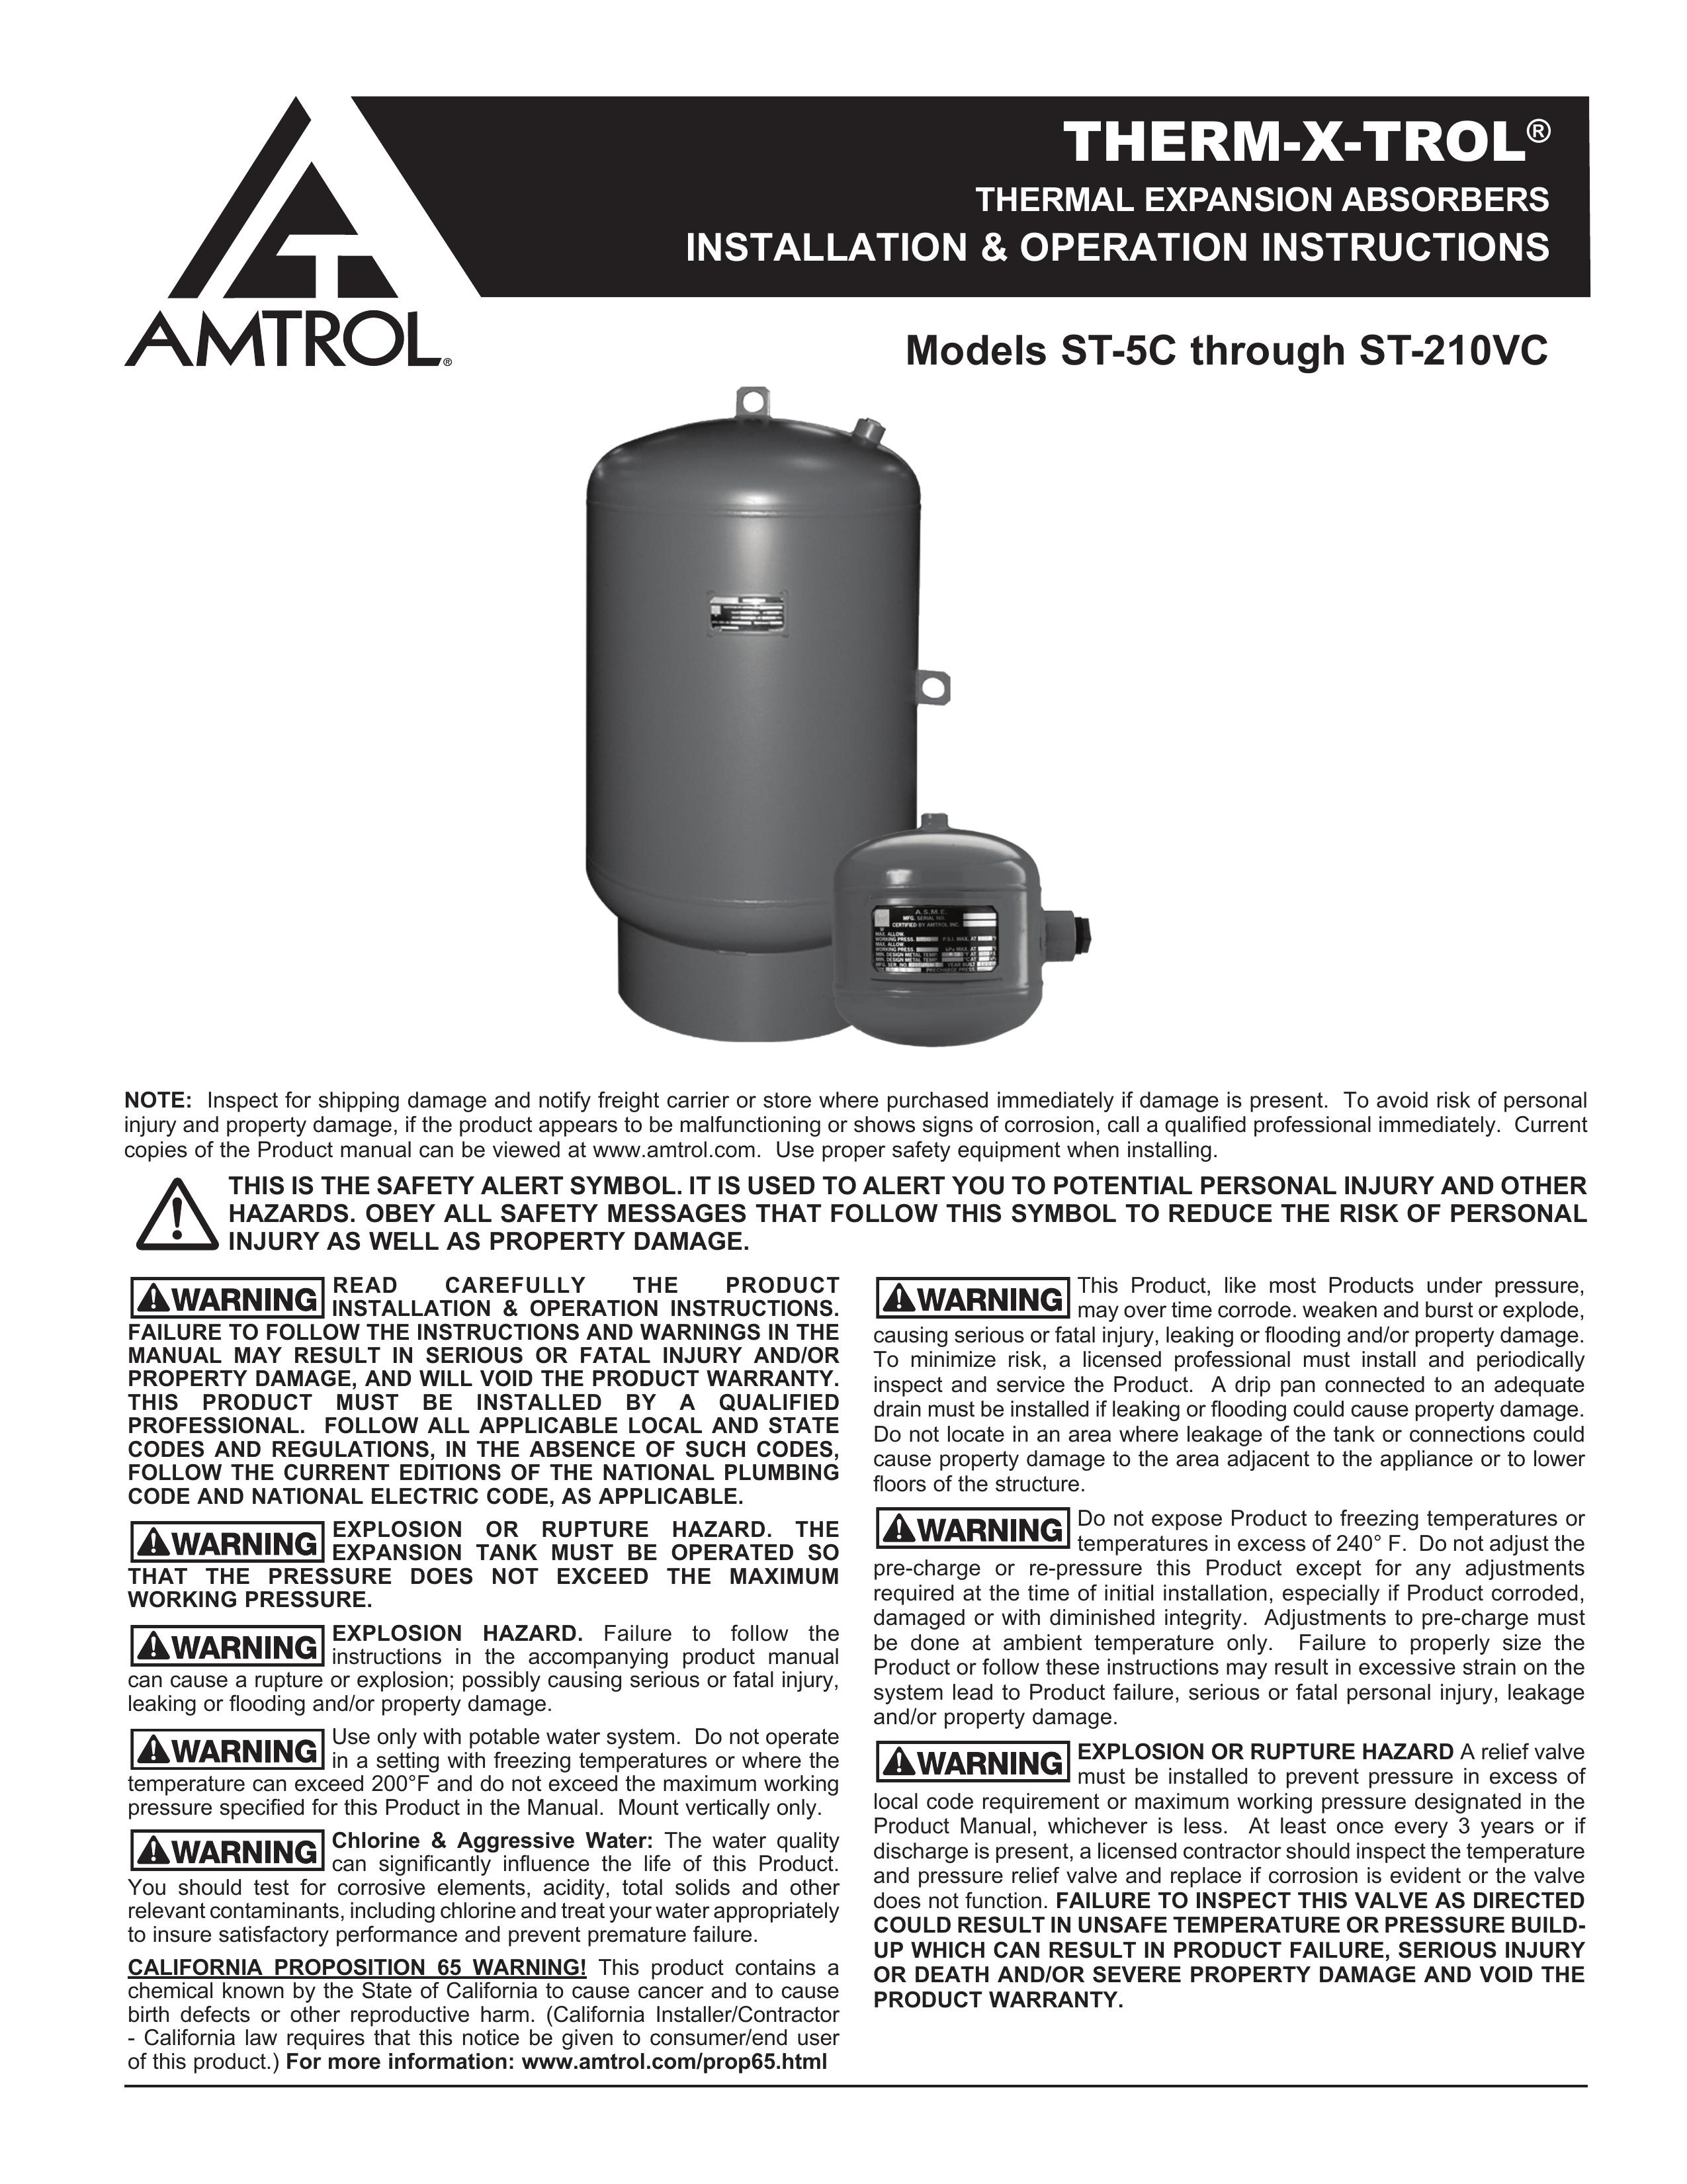 Amtrol ST-5C THROUGH ST-201VC Slow Cooker User Manual